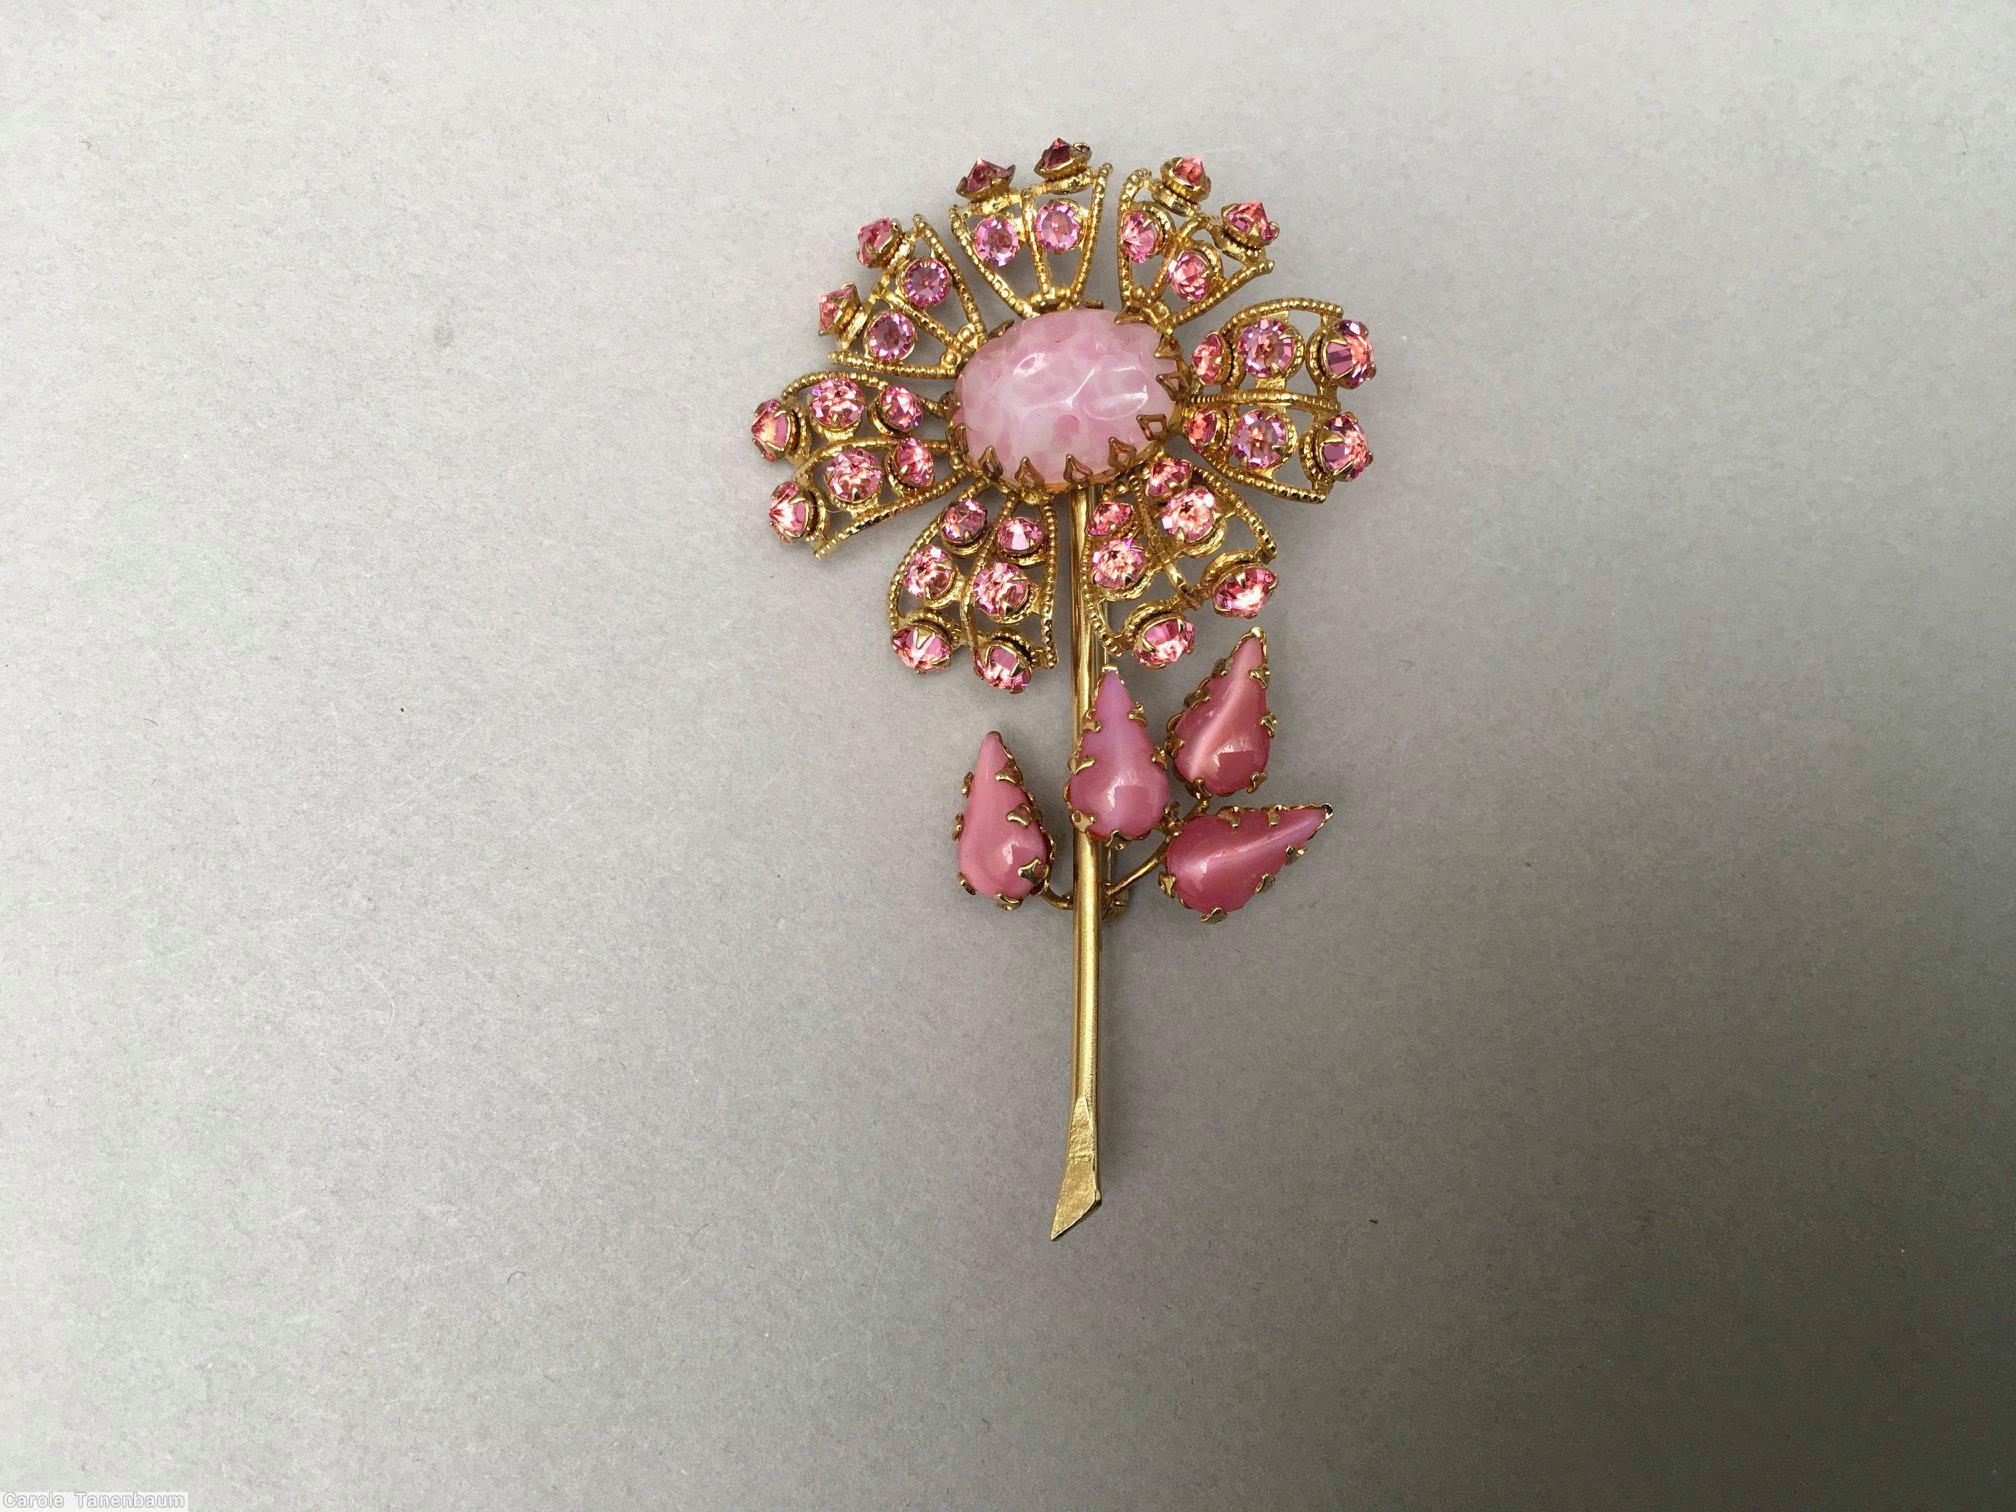 Schreiner long stem daisy flower 7 lace petal large oval center 4 leaf moonglow pink marbled pin ice pink goldtone jewelry